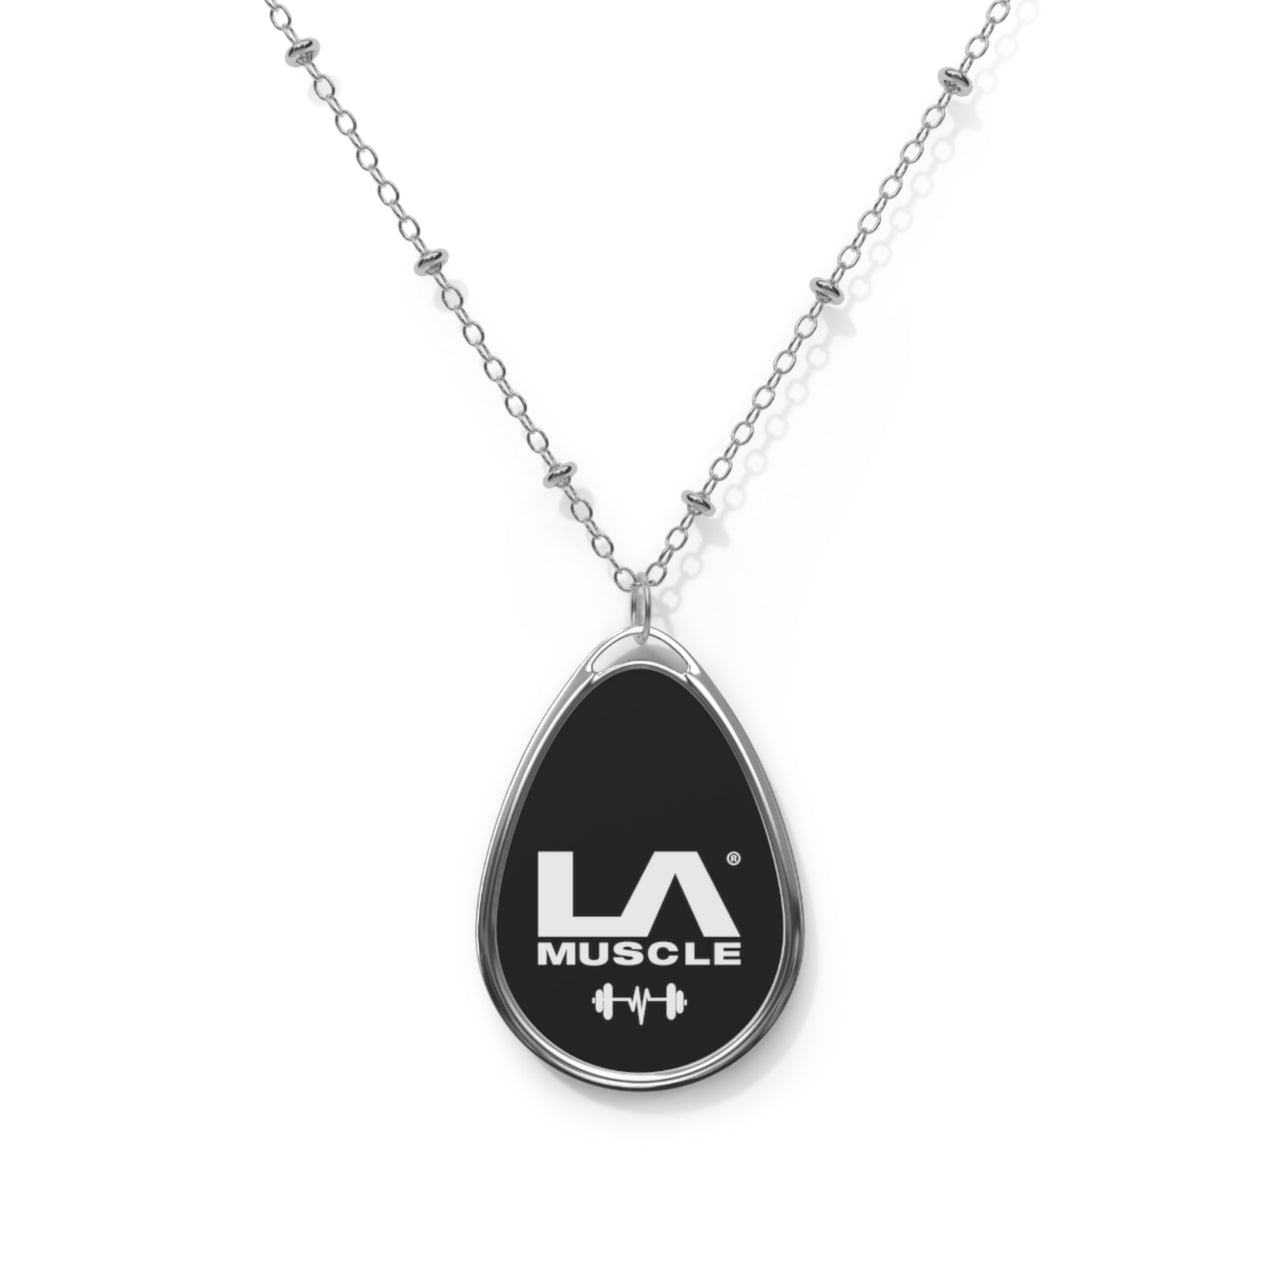 LA MUSCLE LIMITED EDITION Oval Necklace